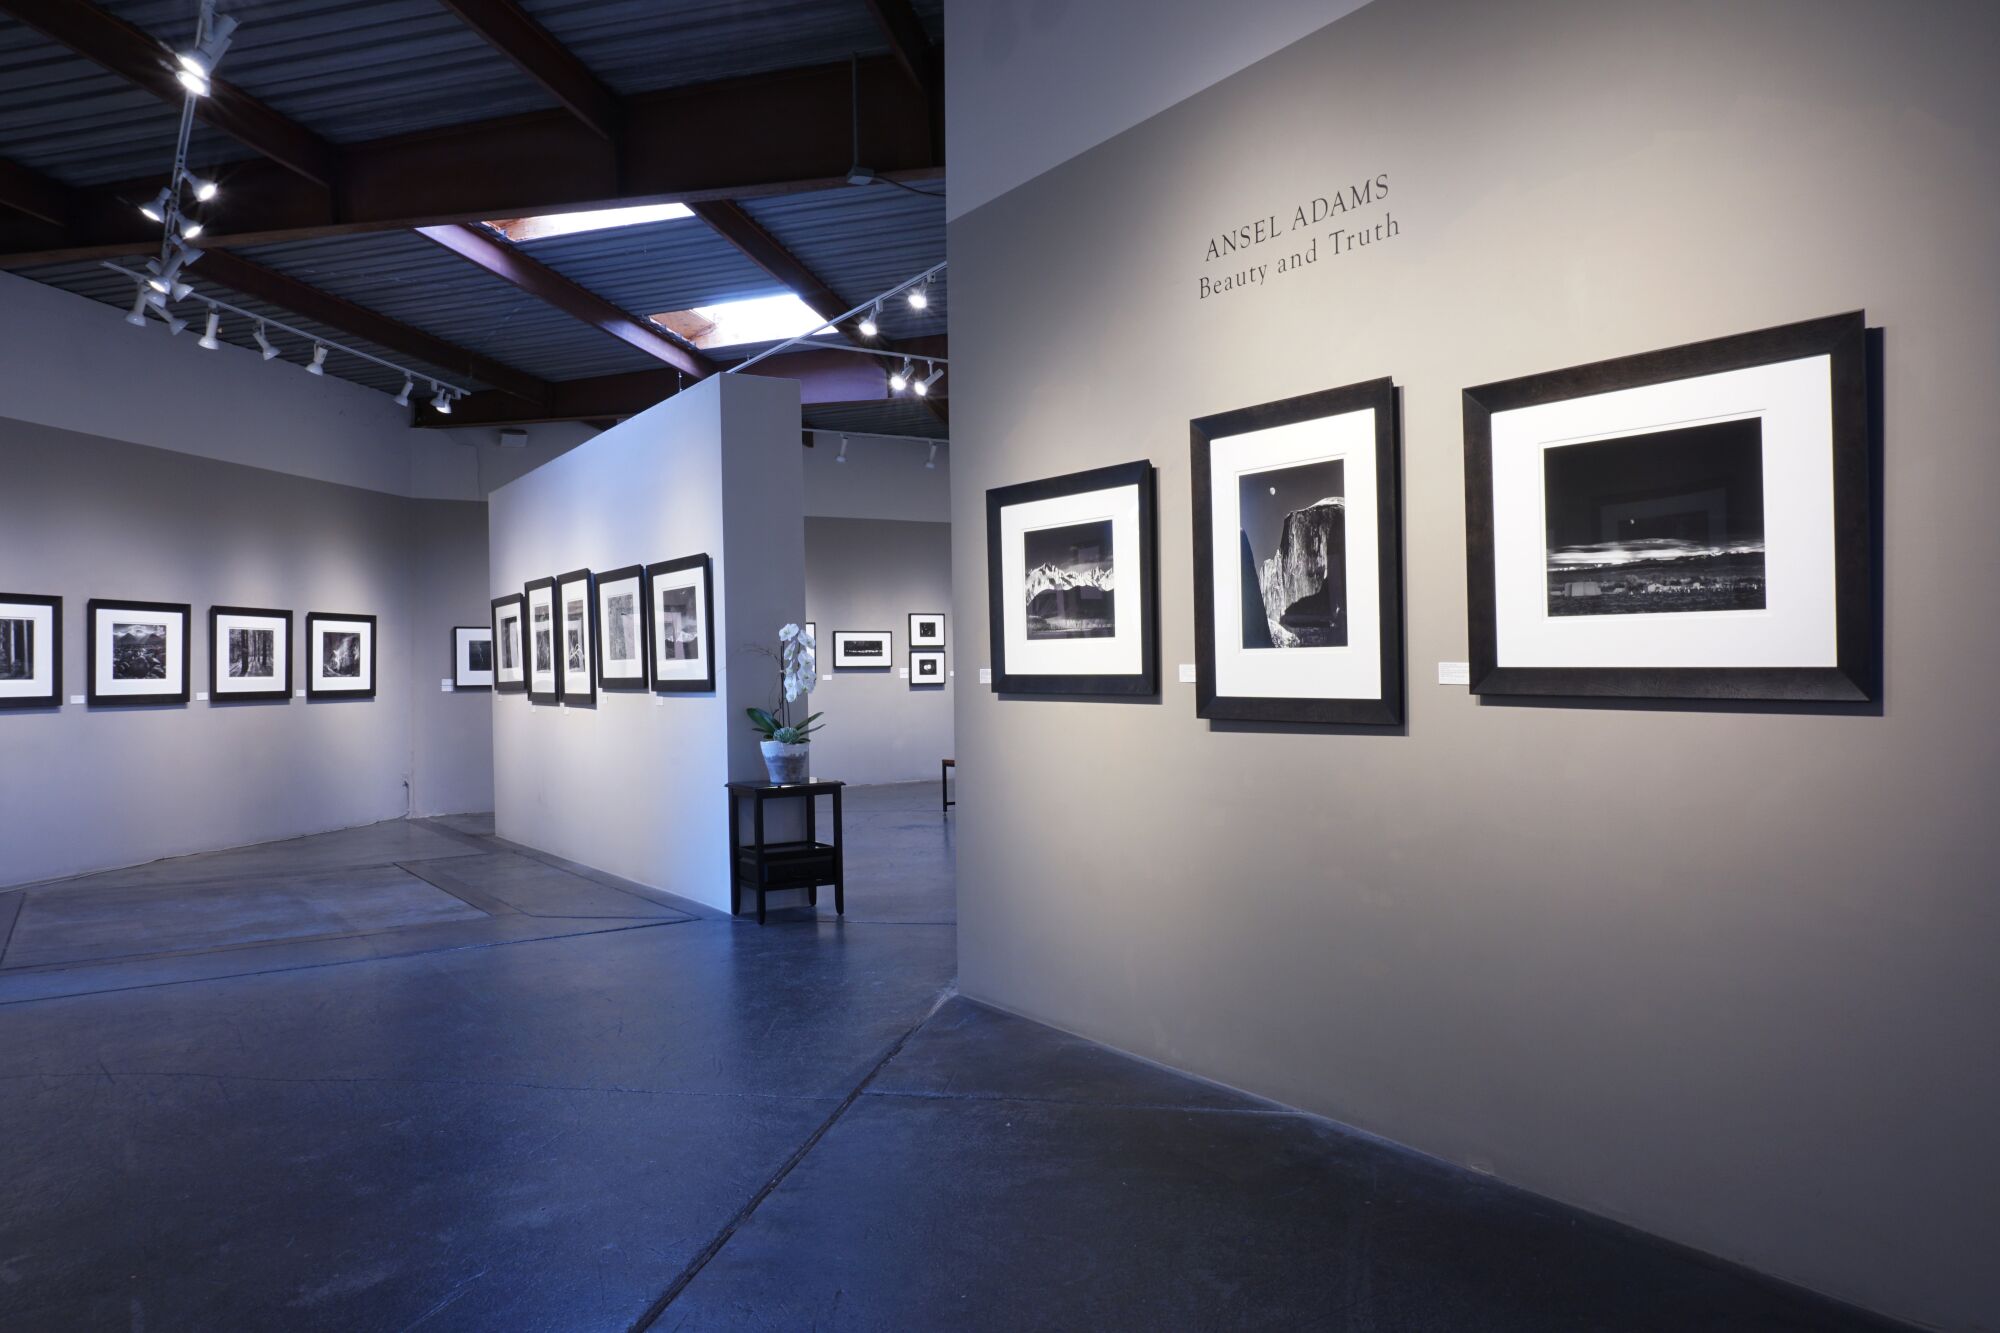 A show of photographs by Ansel Adams at Peter Fetterman Gallery was three years in the making.